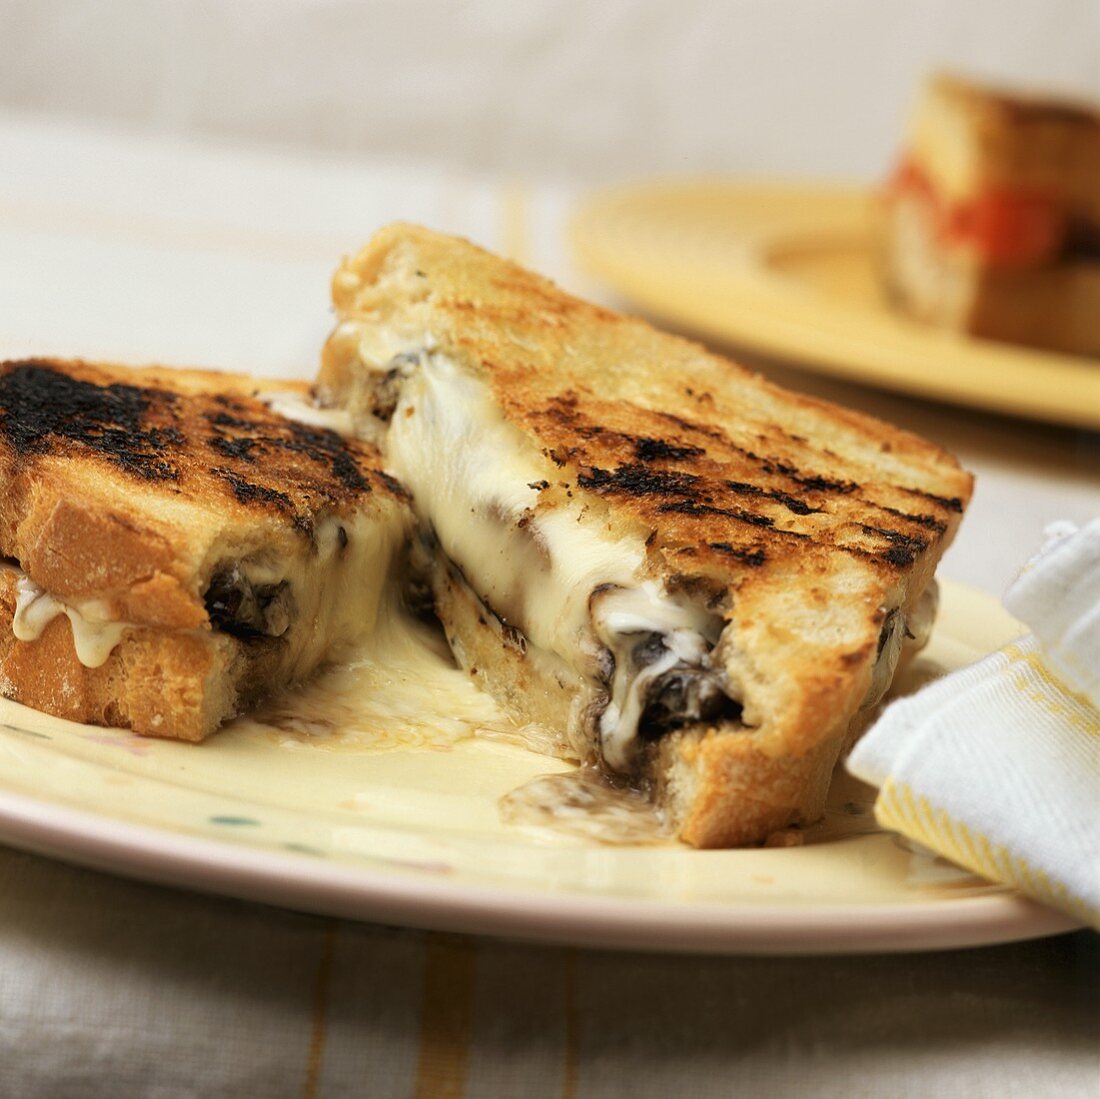 Grilled Fontina and Mushroom Sandwich